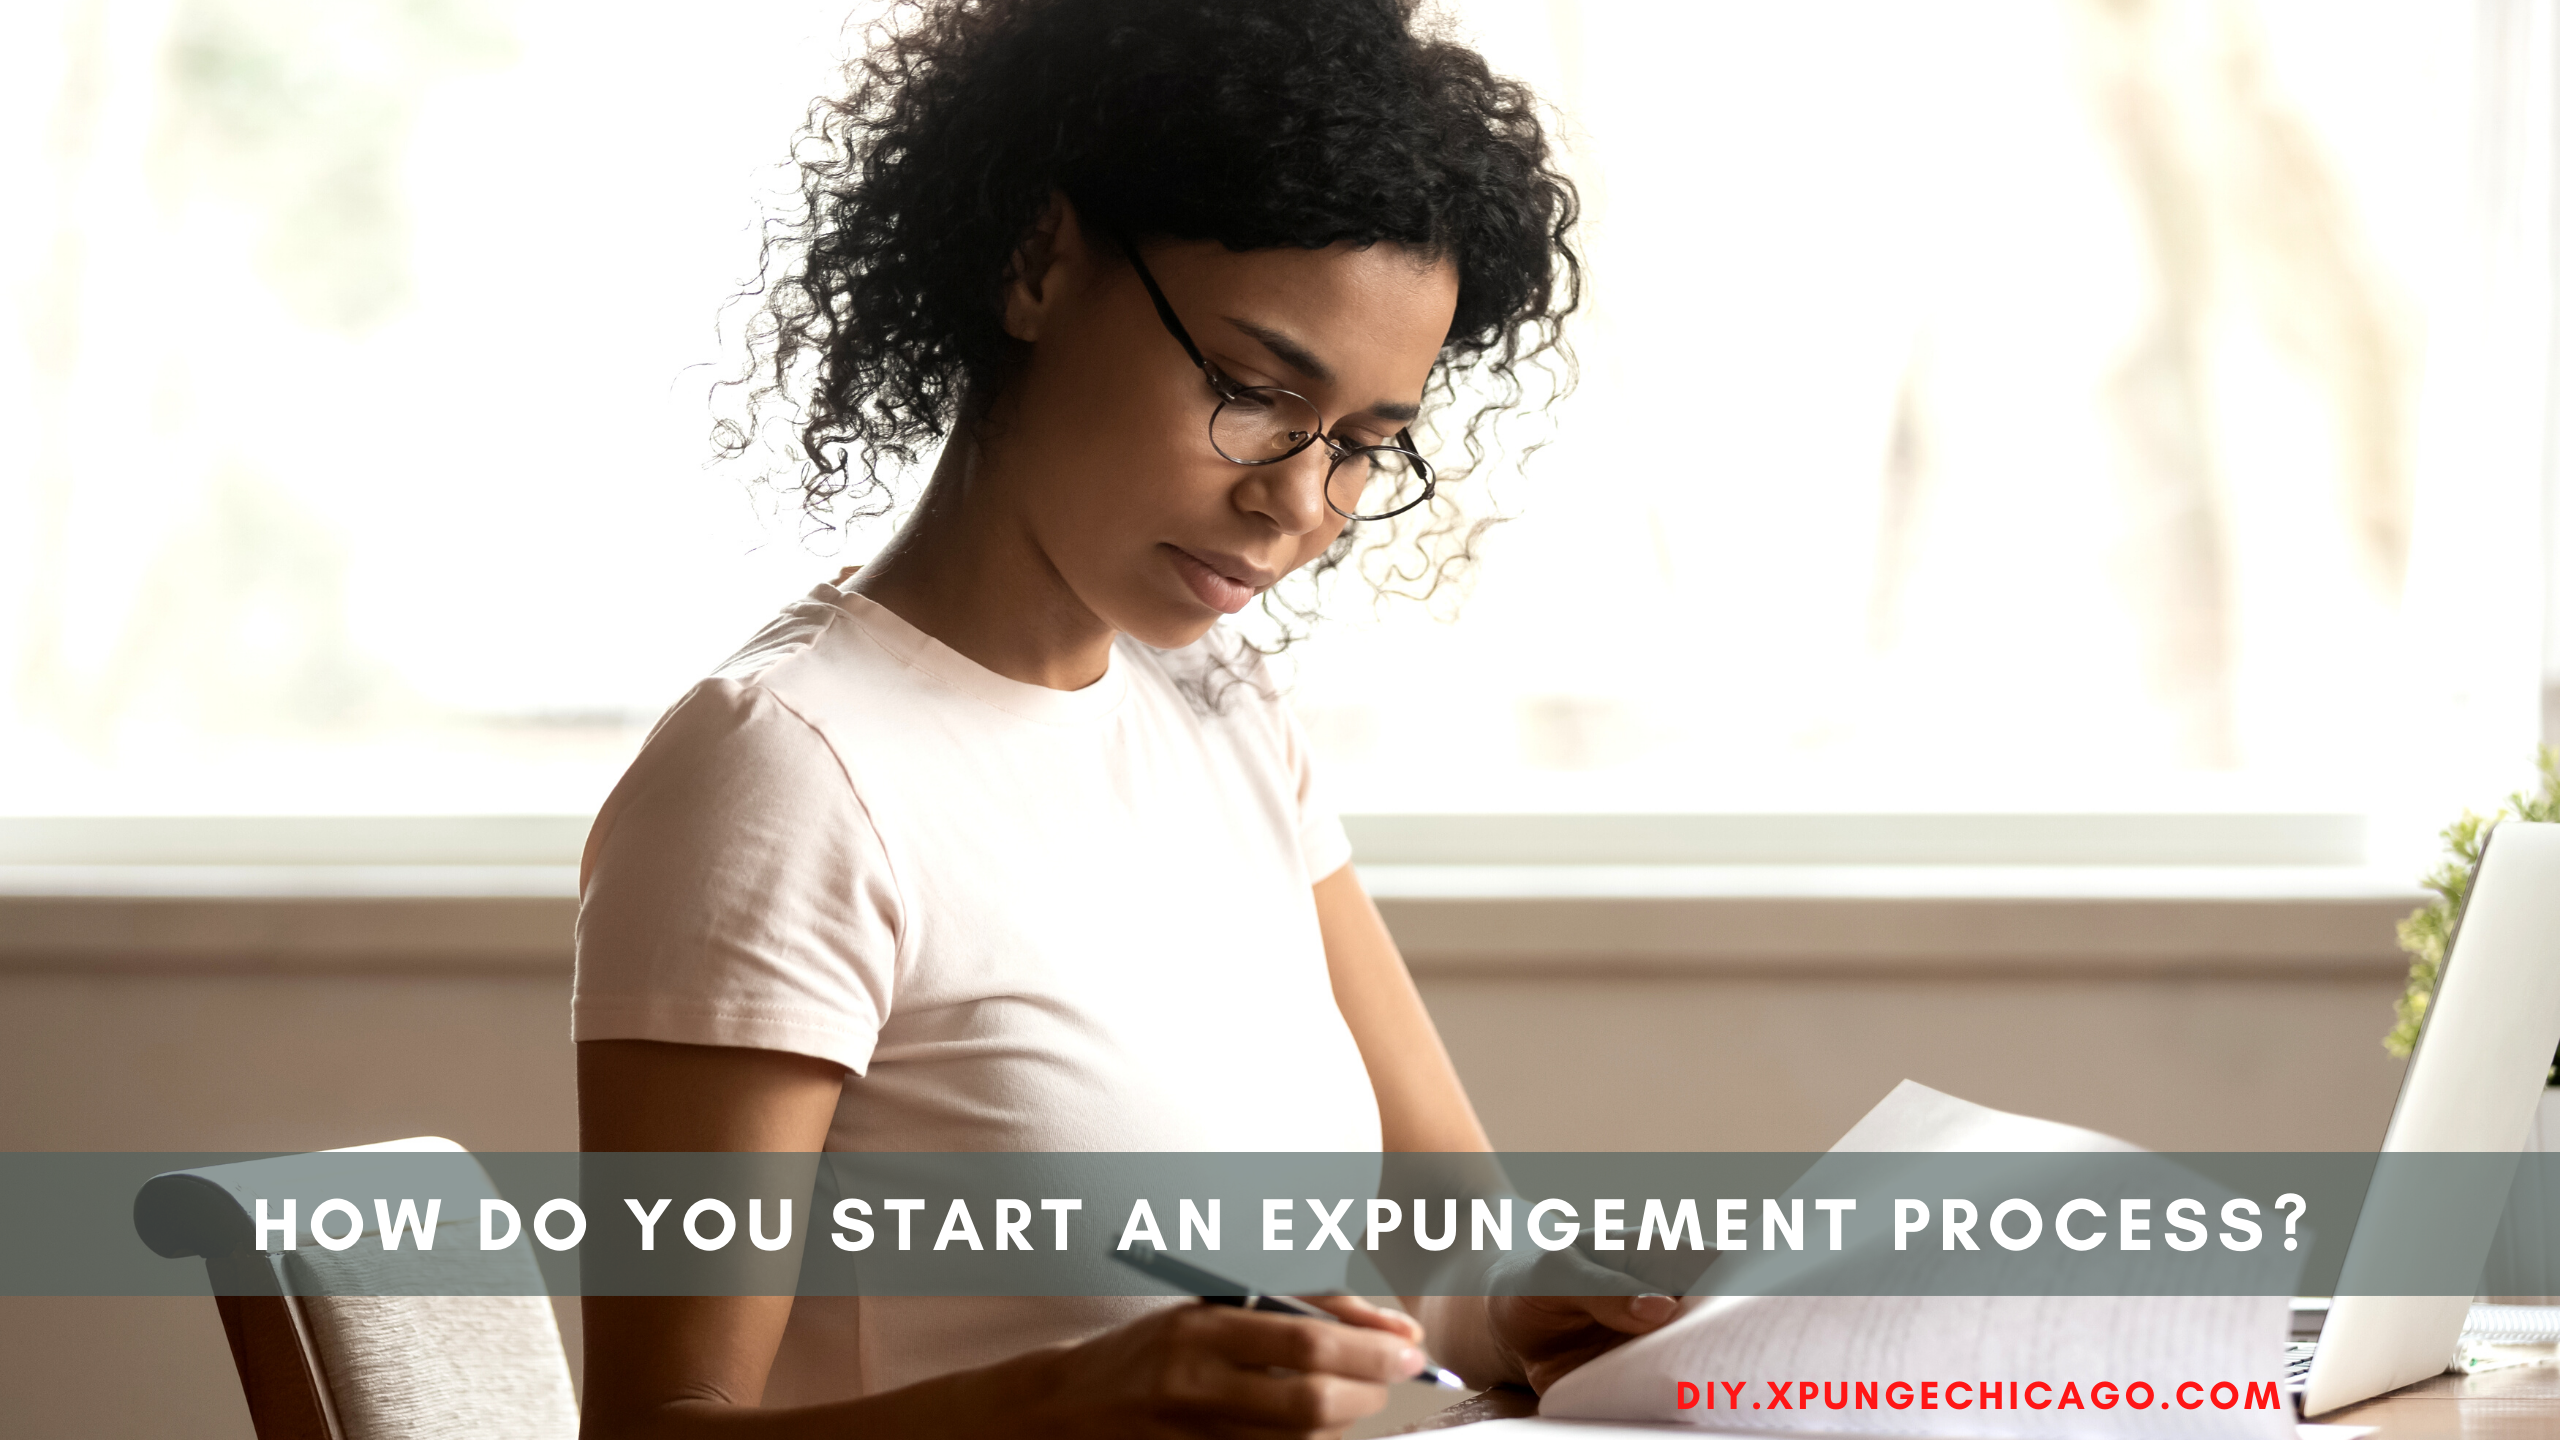 How Do You Start an Expungement Process